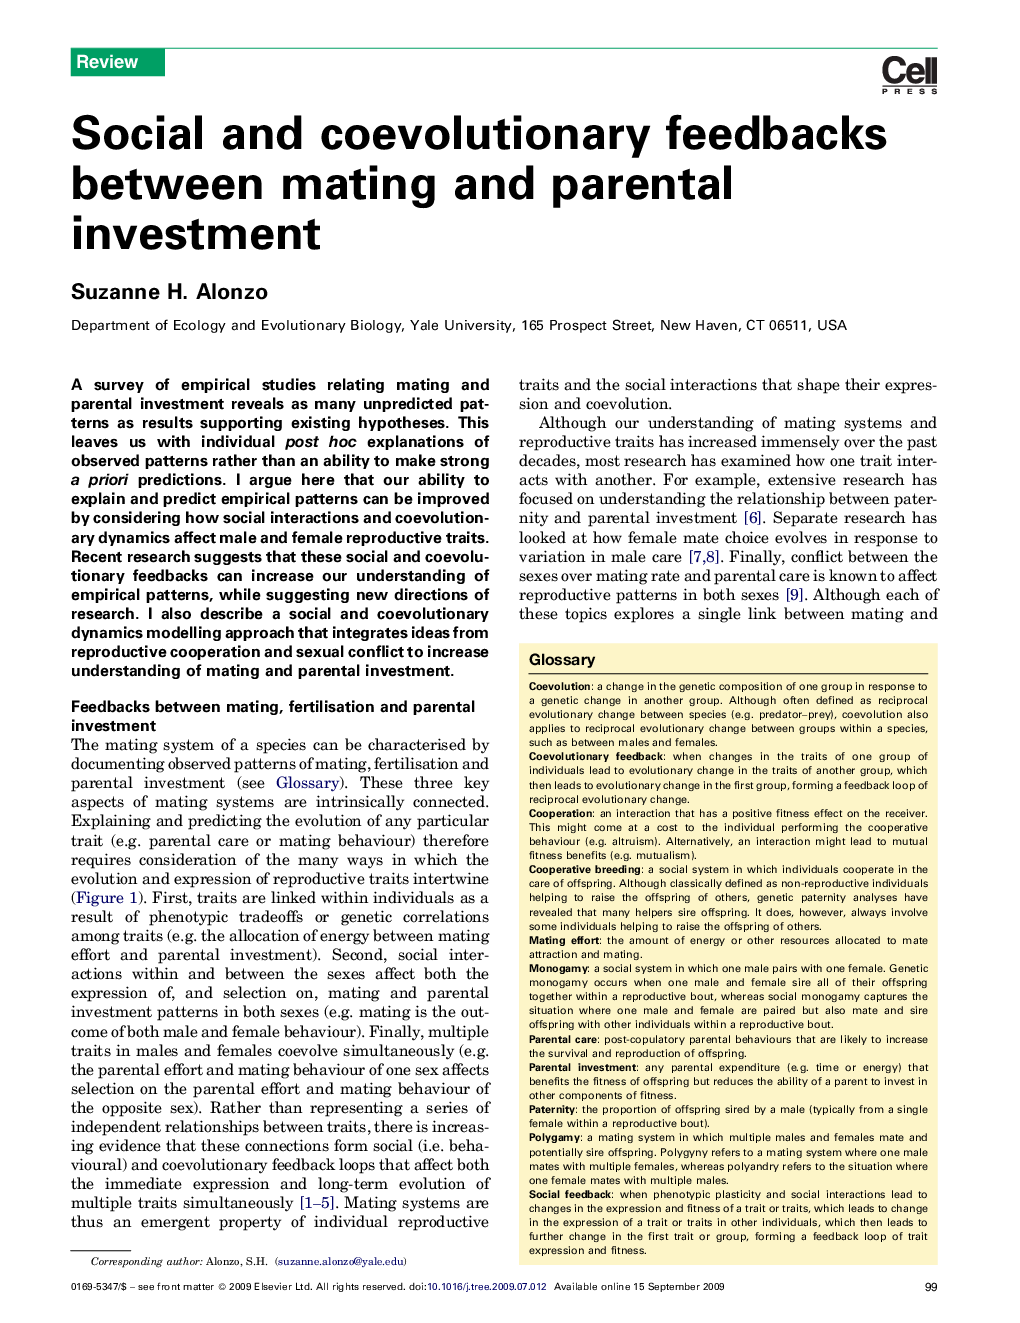 Social and coevolutionary feedbacks between mating and parental investment